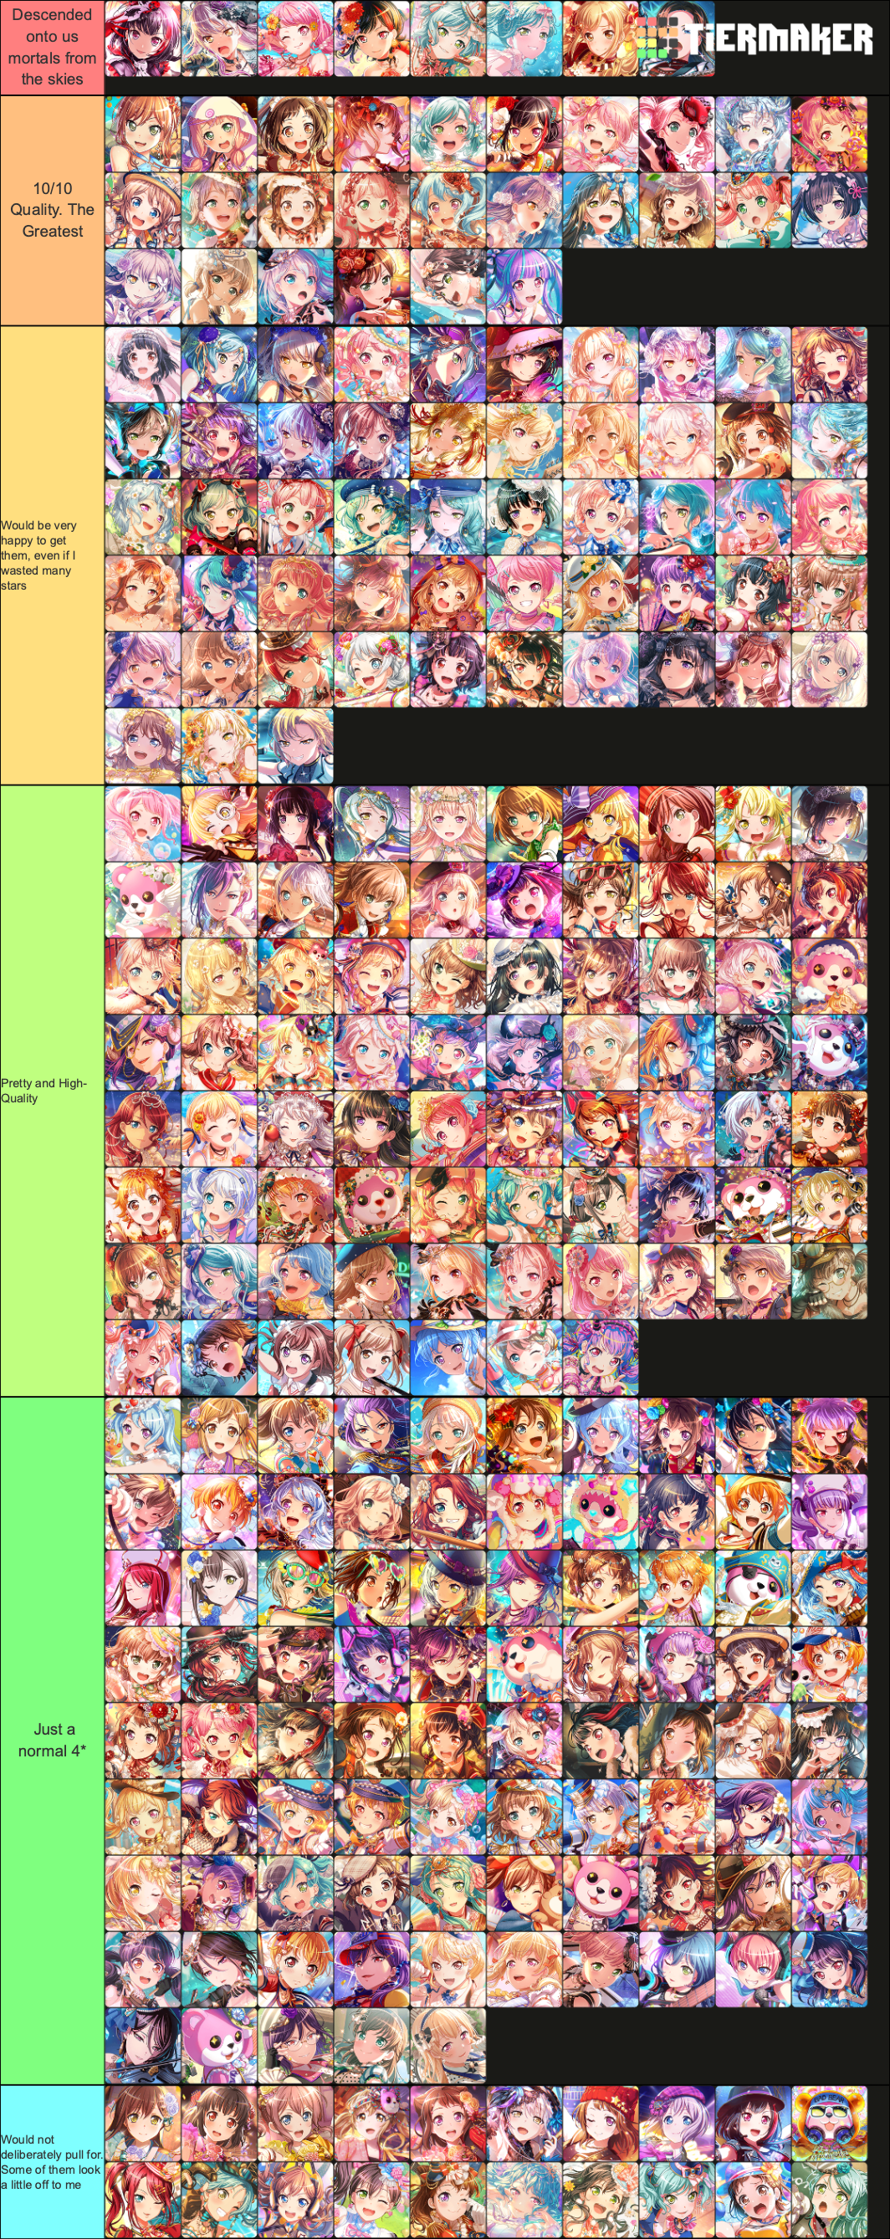 God these take forever to make... Anyways Ig this is the bandwagon now but I love the top tier cards...